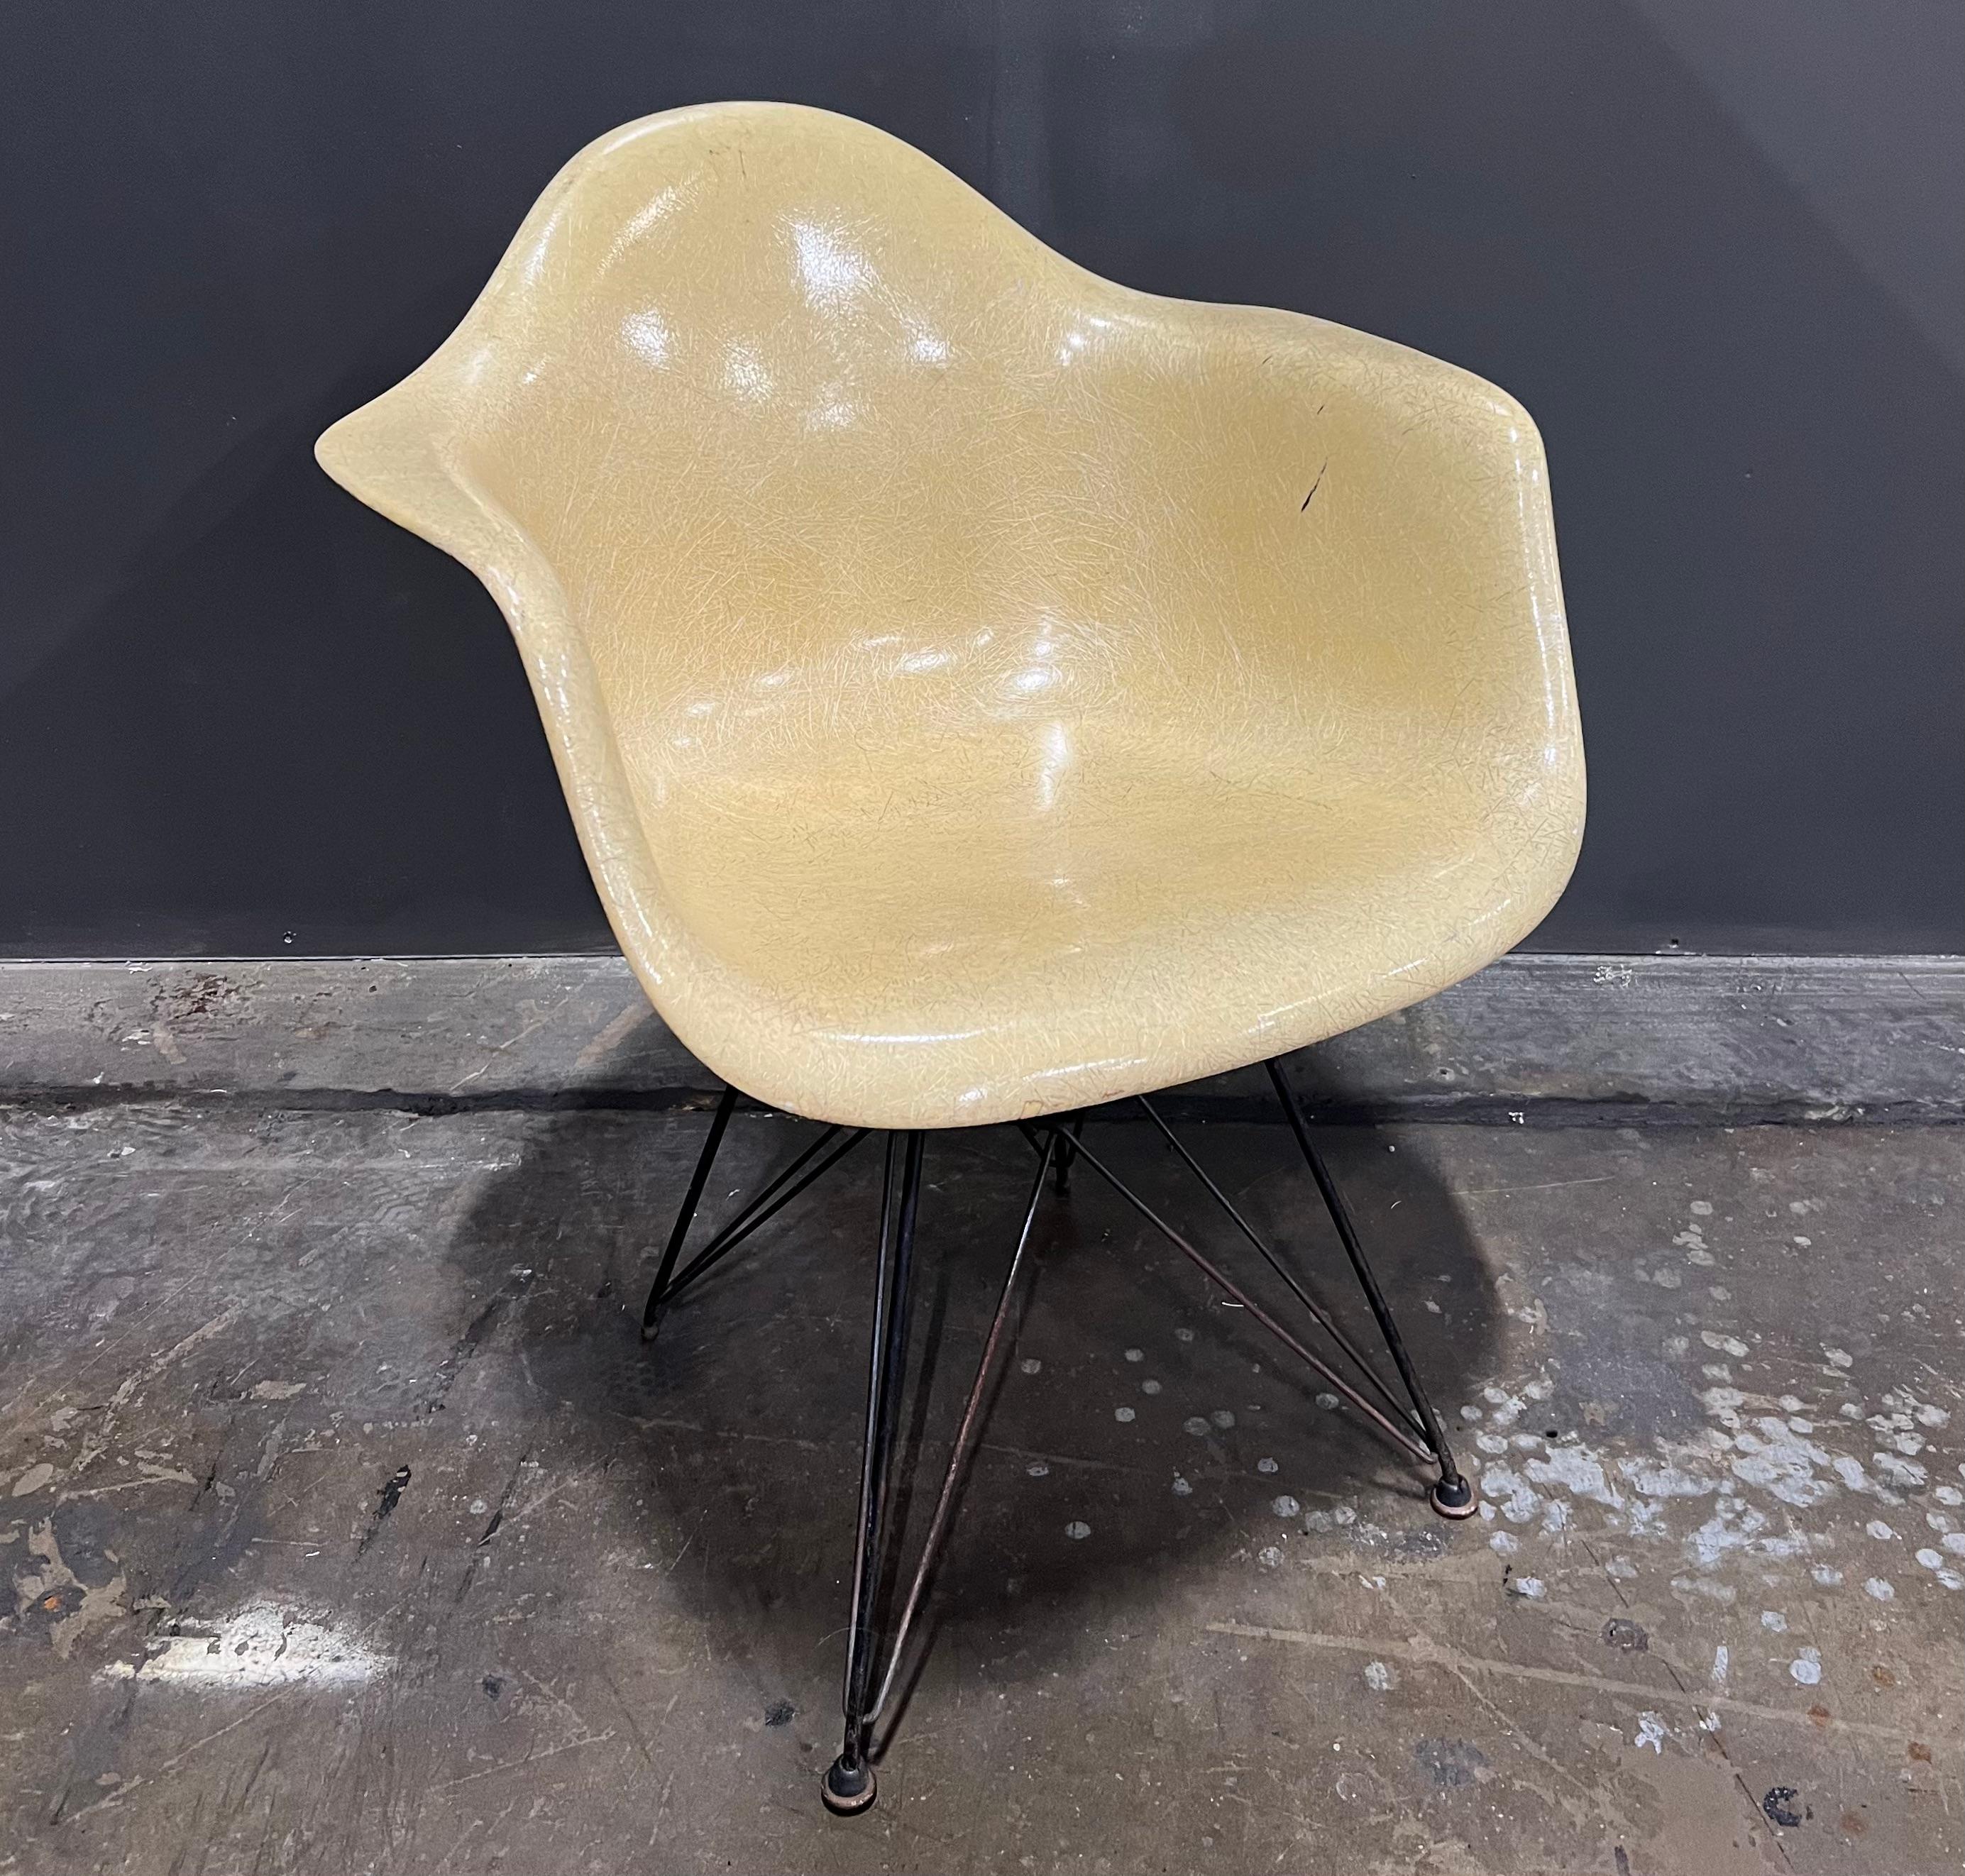 For your consideration we offer this wonderful early production Eames 2nd generation molded fiberglass arm shell with original Eiffel Tower base. This model is extremely rare as they were only made for 2 years. It is in 100% original unaltered